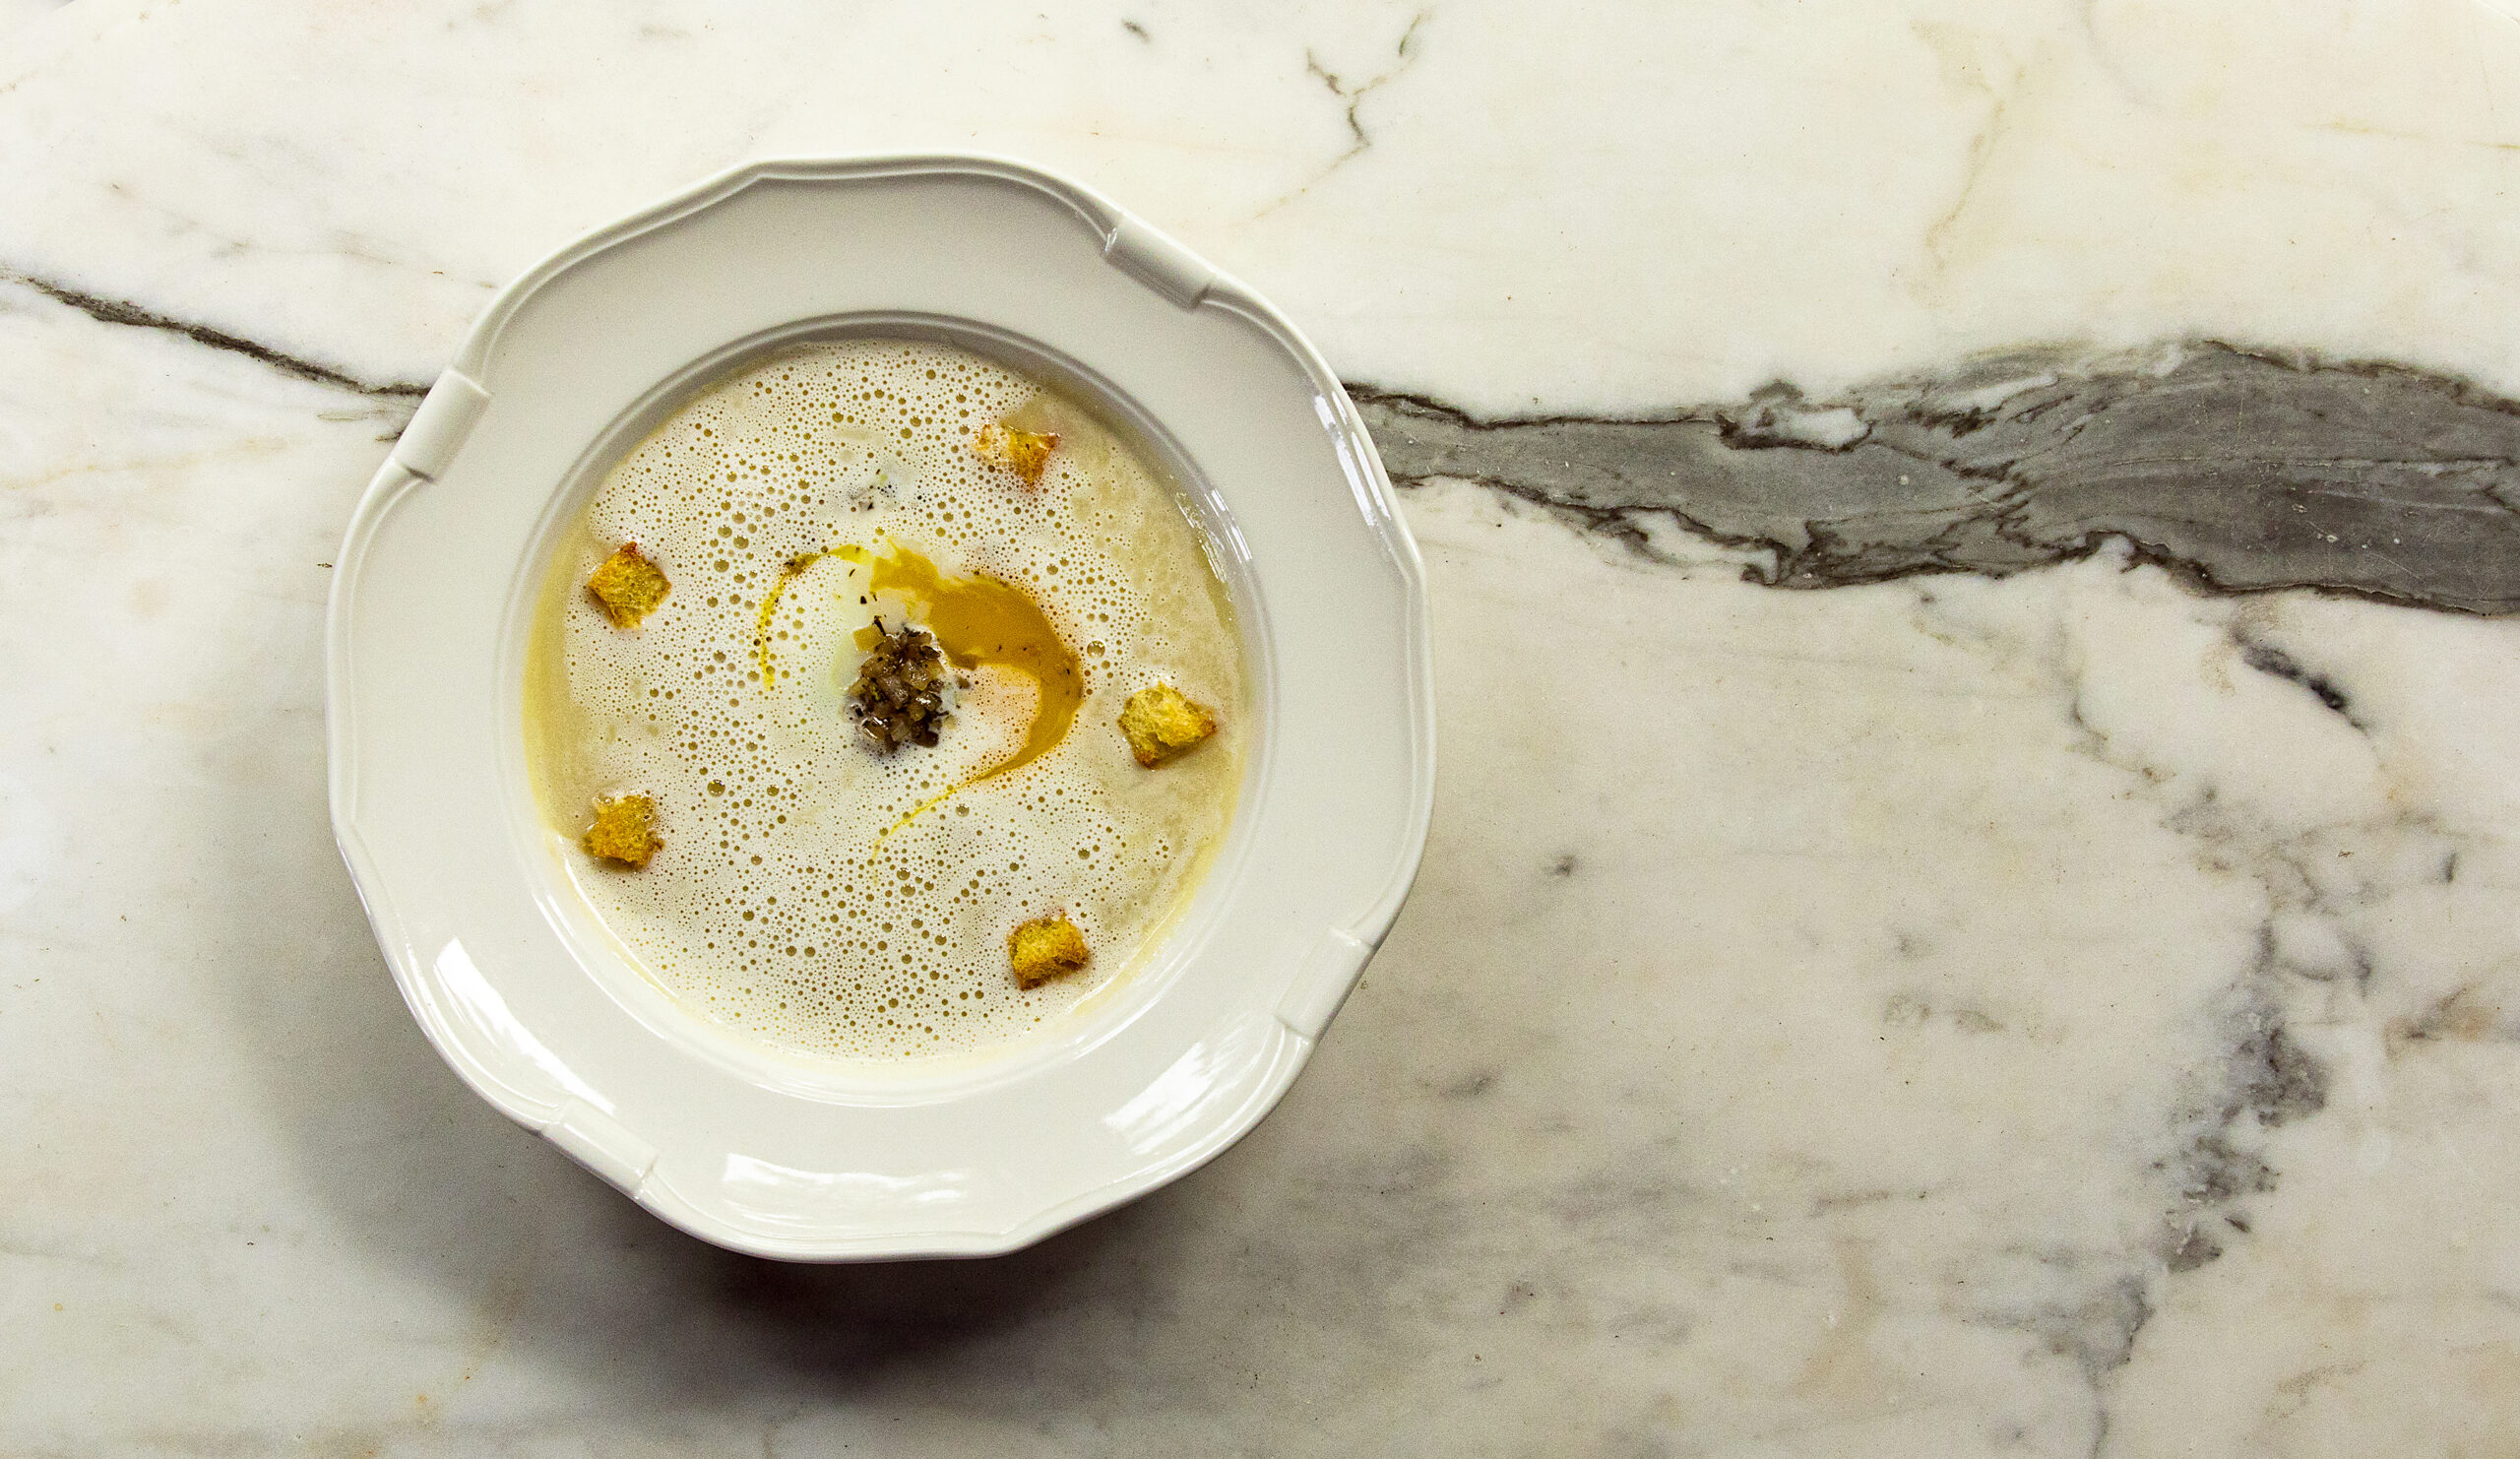 Onion Velouté with slow cooked egg, croutons, Banyuls vinegar, and parmeggiano-Reggiano from The Madrona in Healdsburg Friday, June 3, 2022. (John Burgess / The Press Democrat)